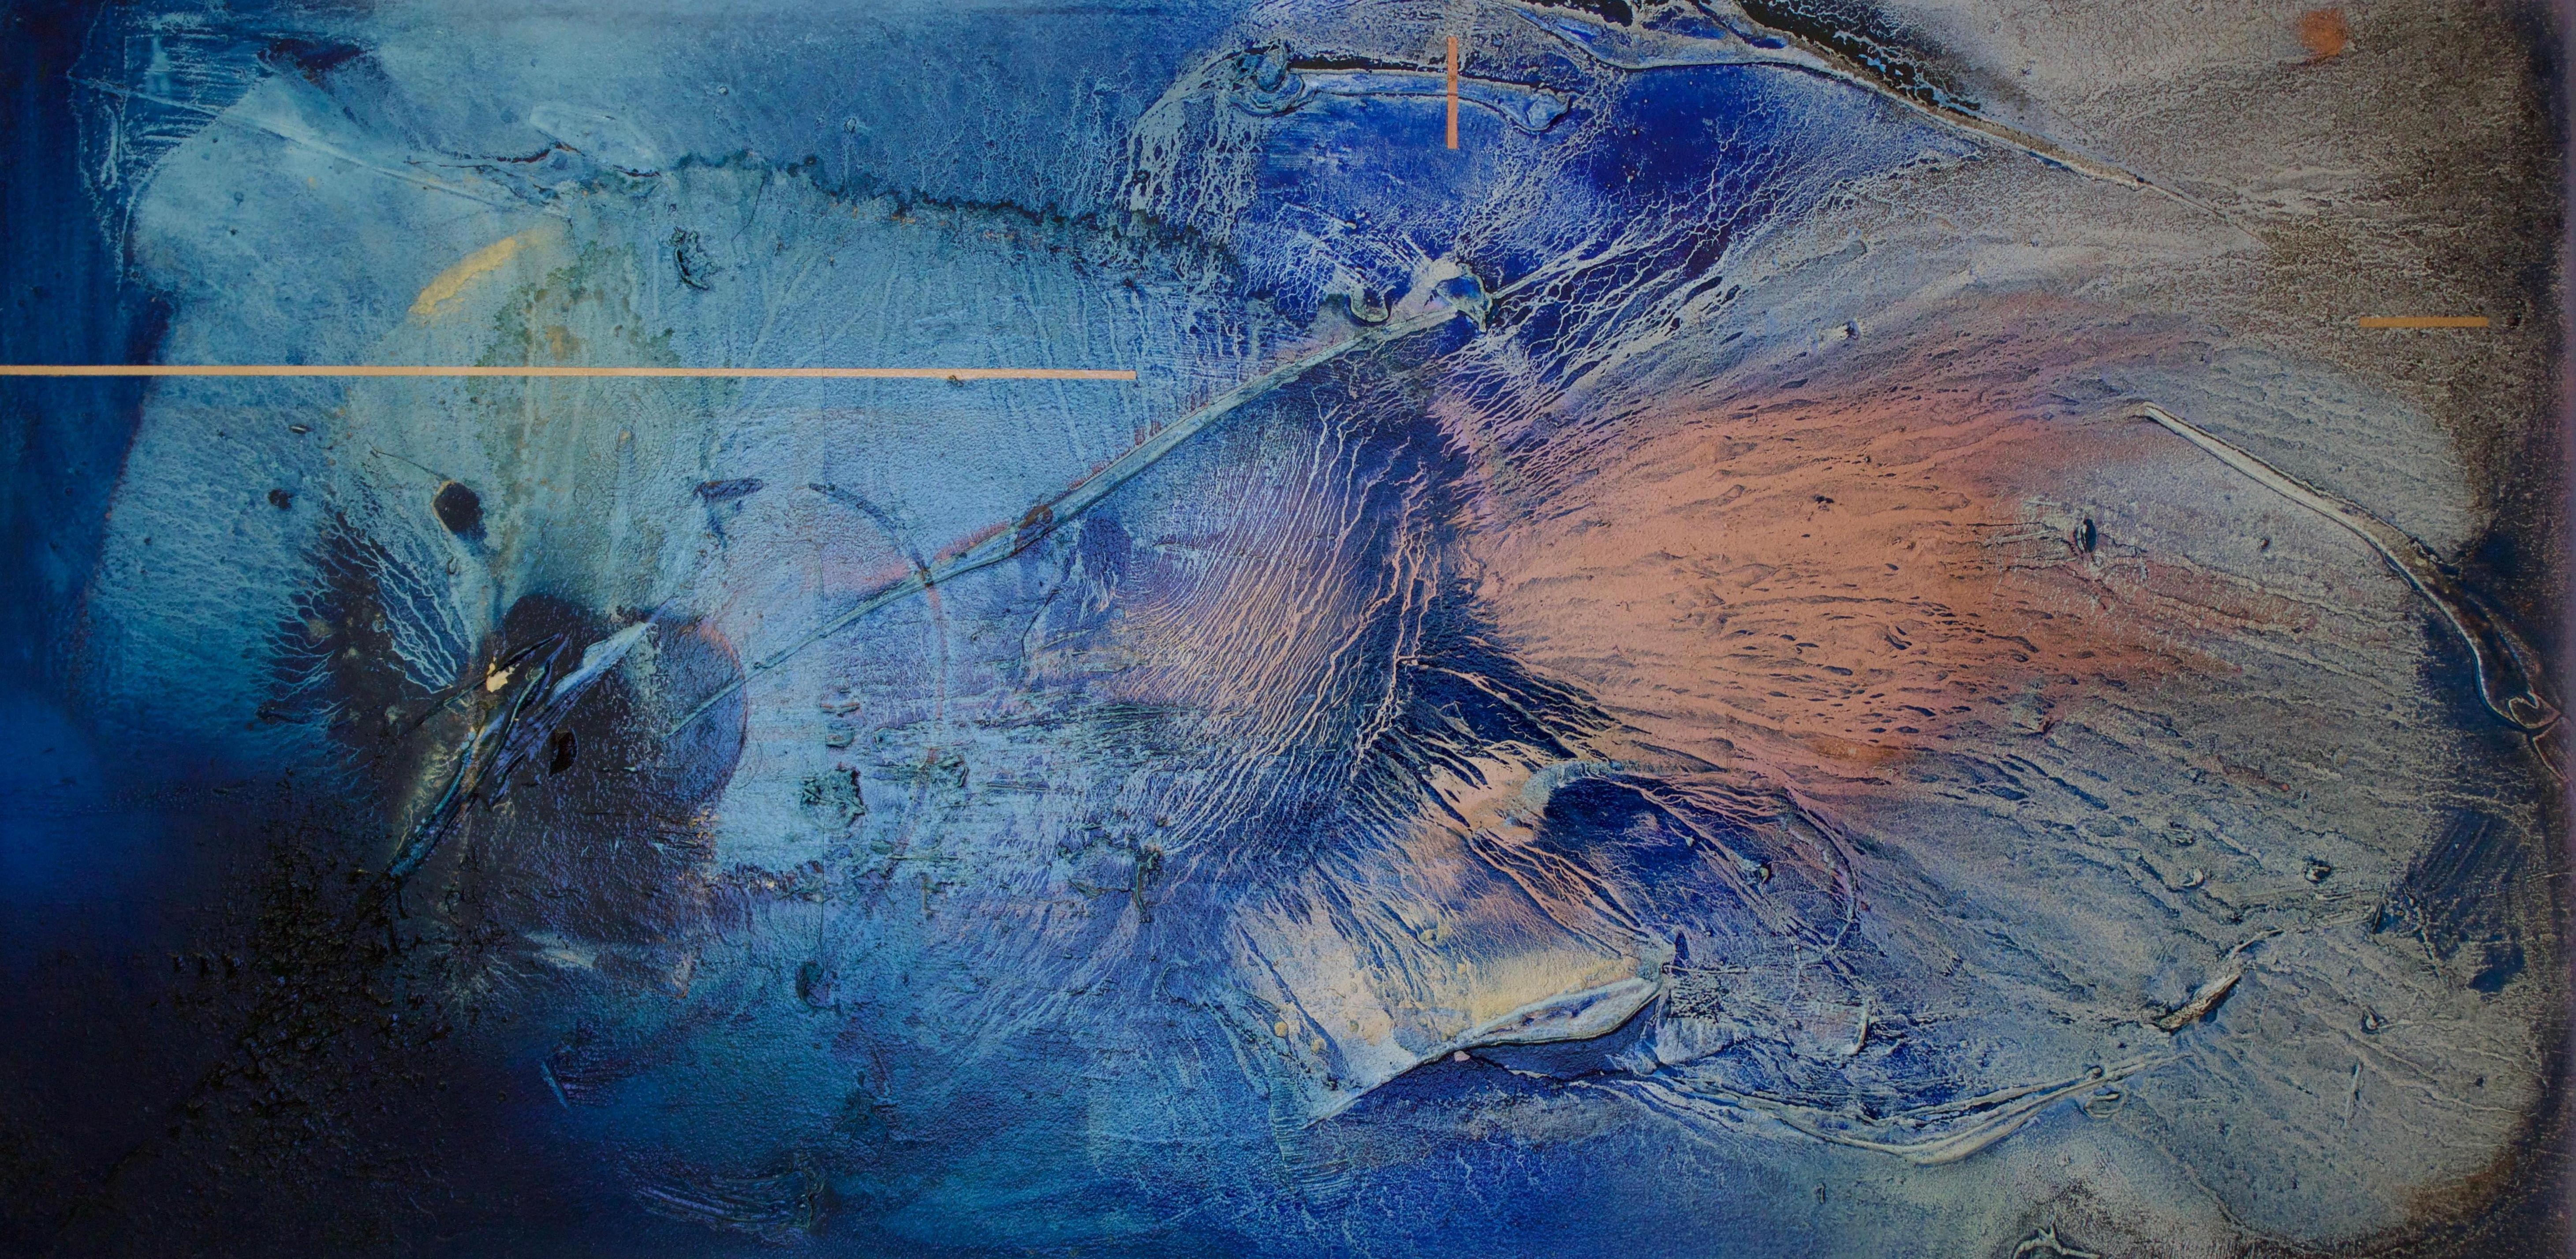 At sea between fossils and satellites 7 (blue organic copper abstract texture) - Painting by Melisa Taylor Metzger